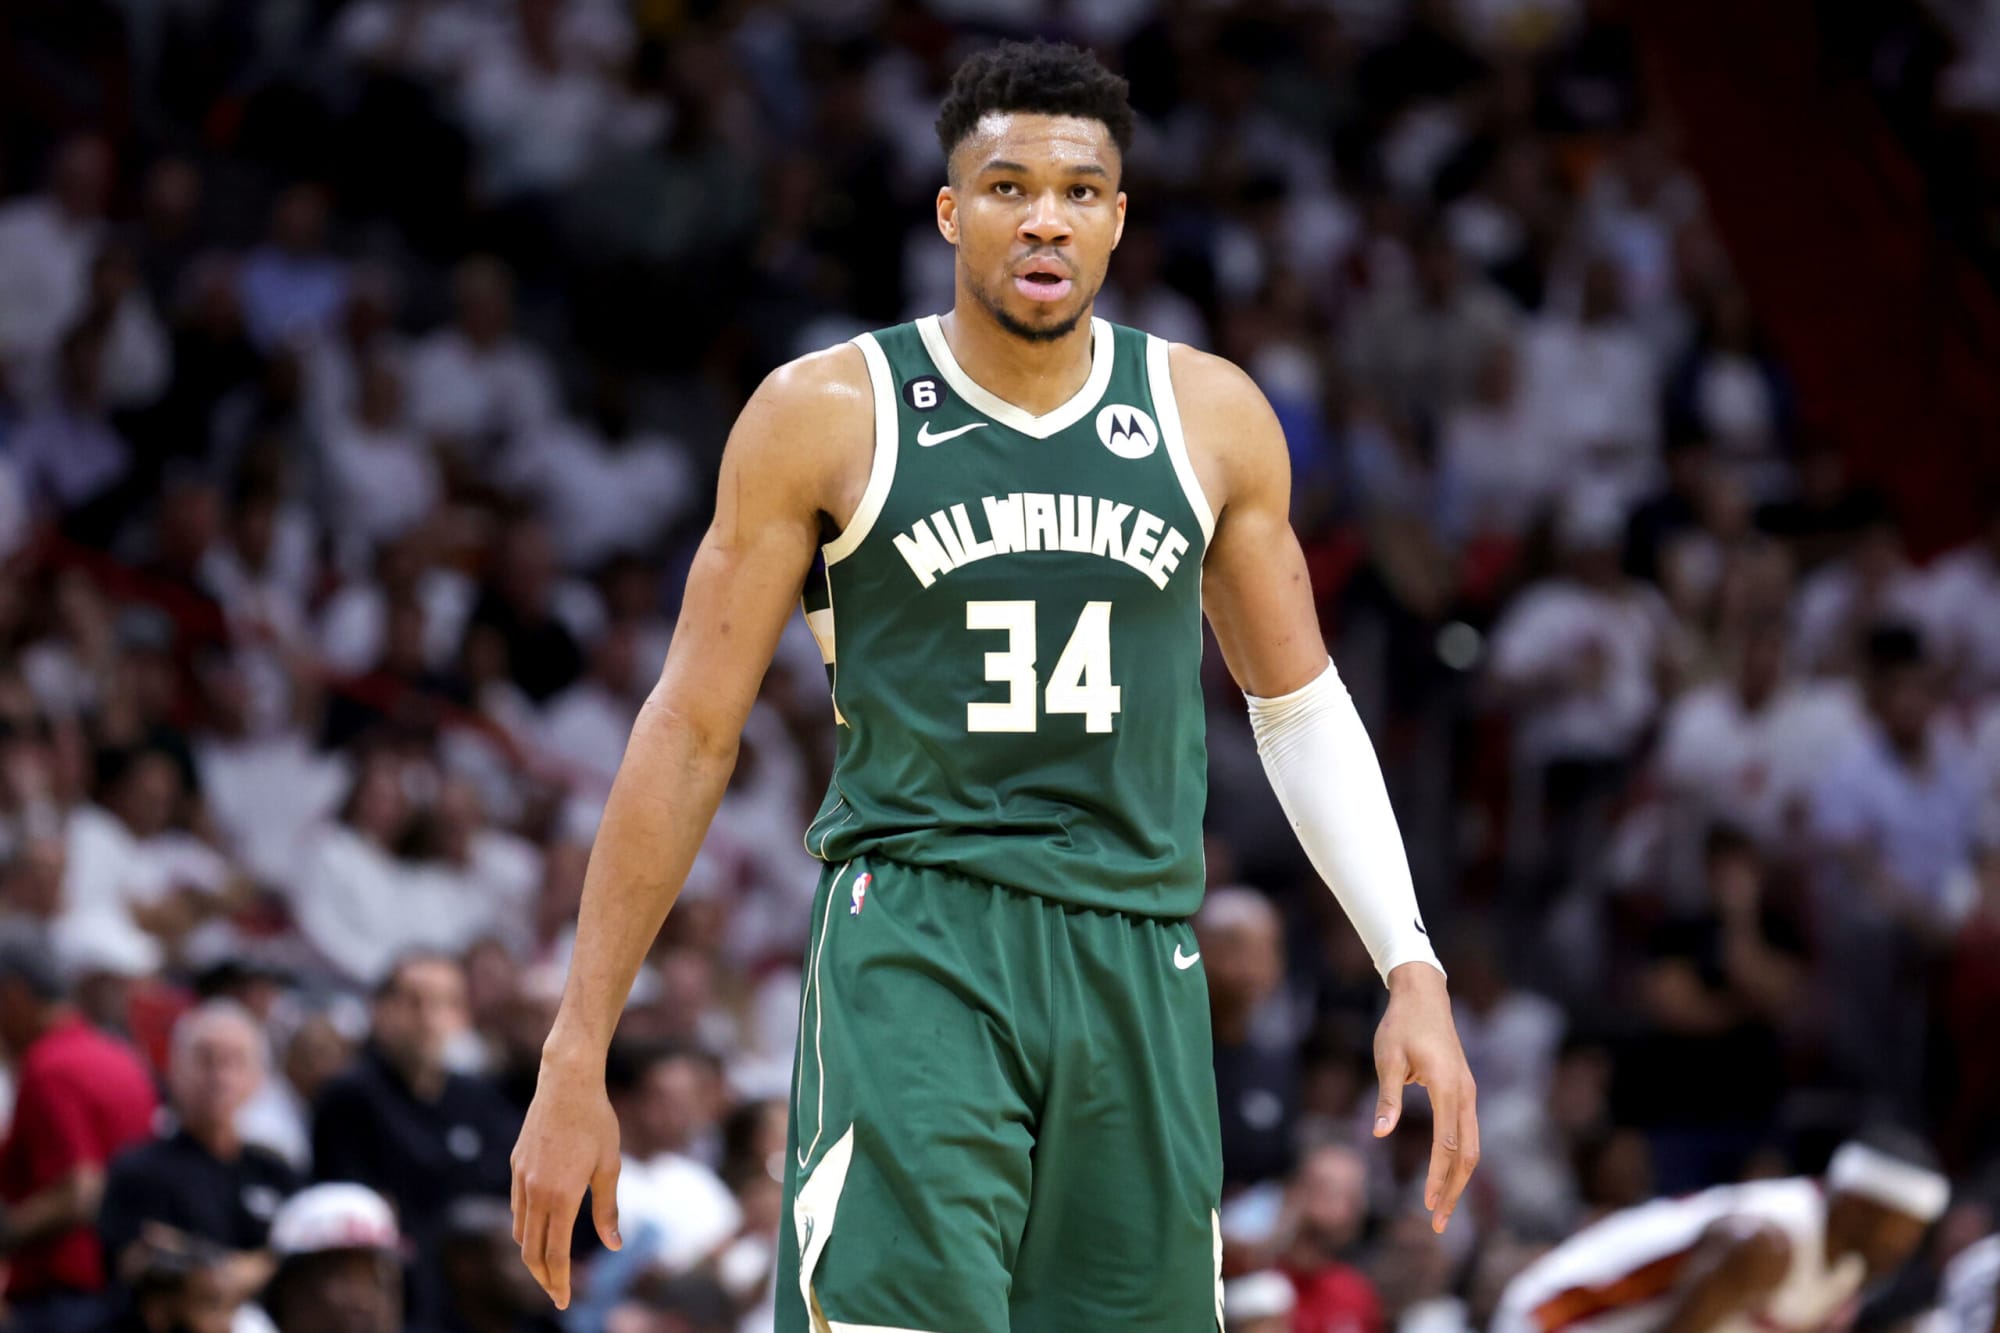 NBA Trade News: "Keep options open" - Listening to analyst's advice, Giannis Antetokounmpo could team up with Stephen Curry 